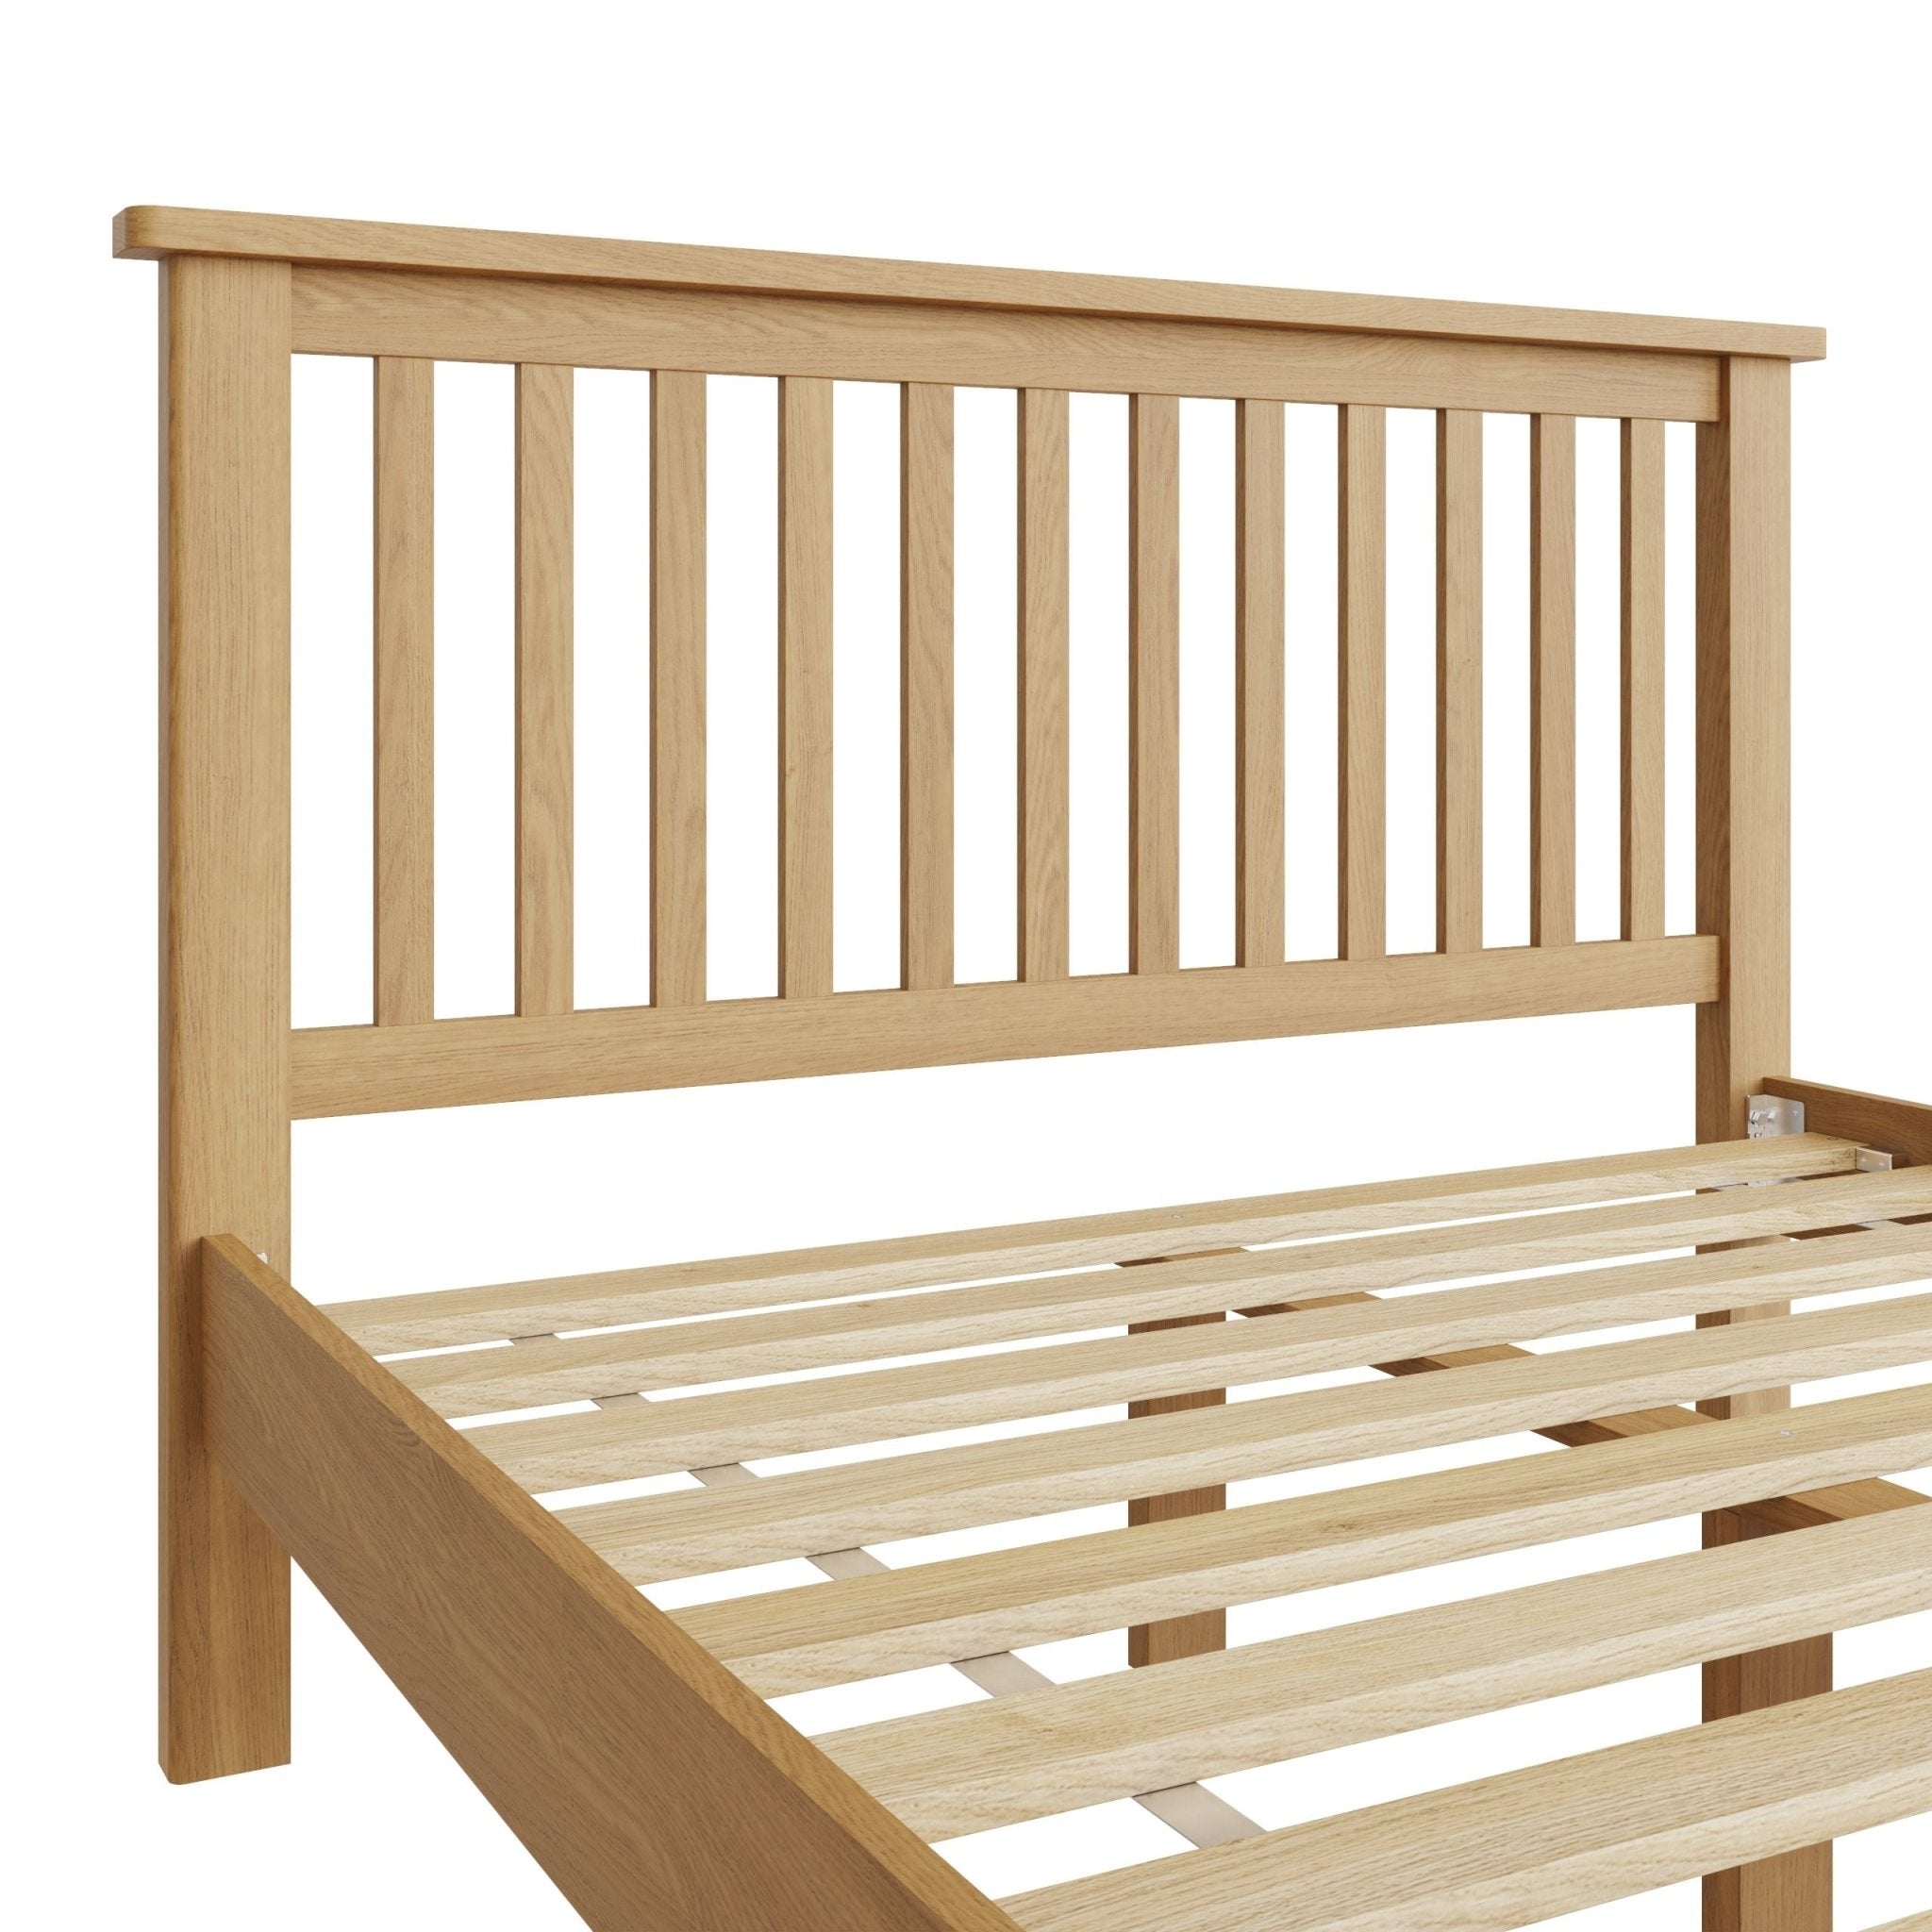 Loxwood Oak Double Bed Frame 4ft 6 - Duck Barn Interiors